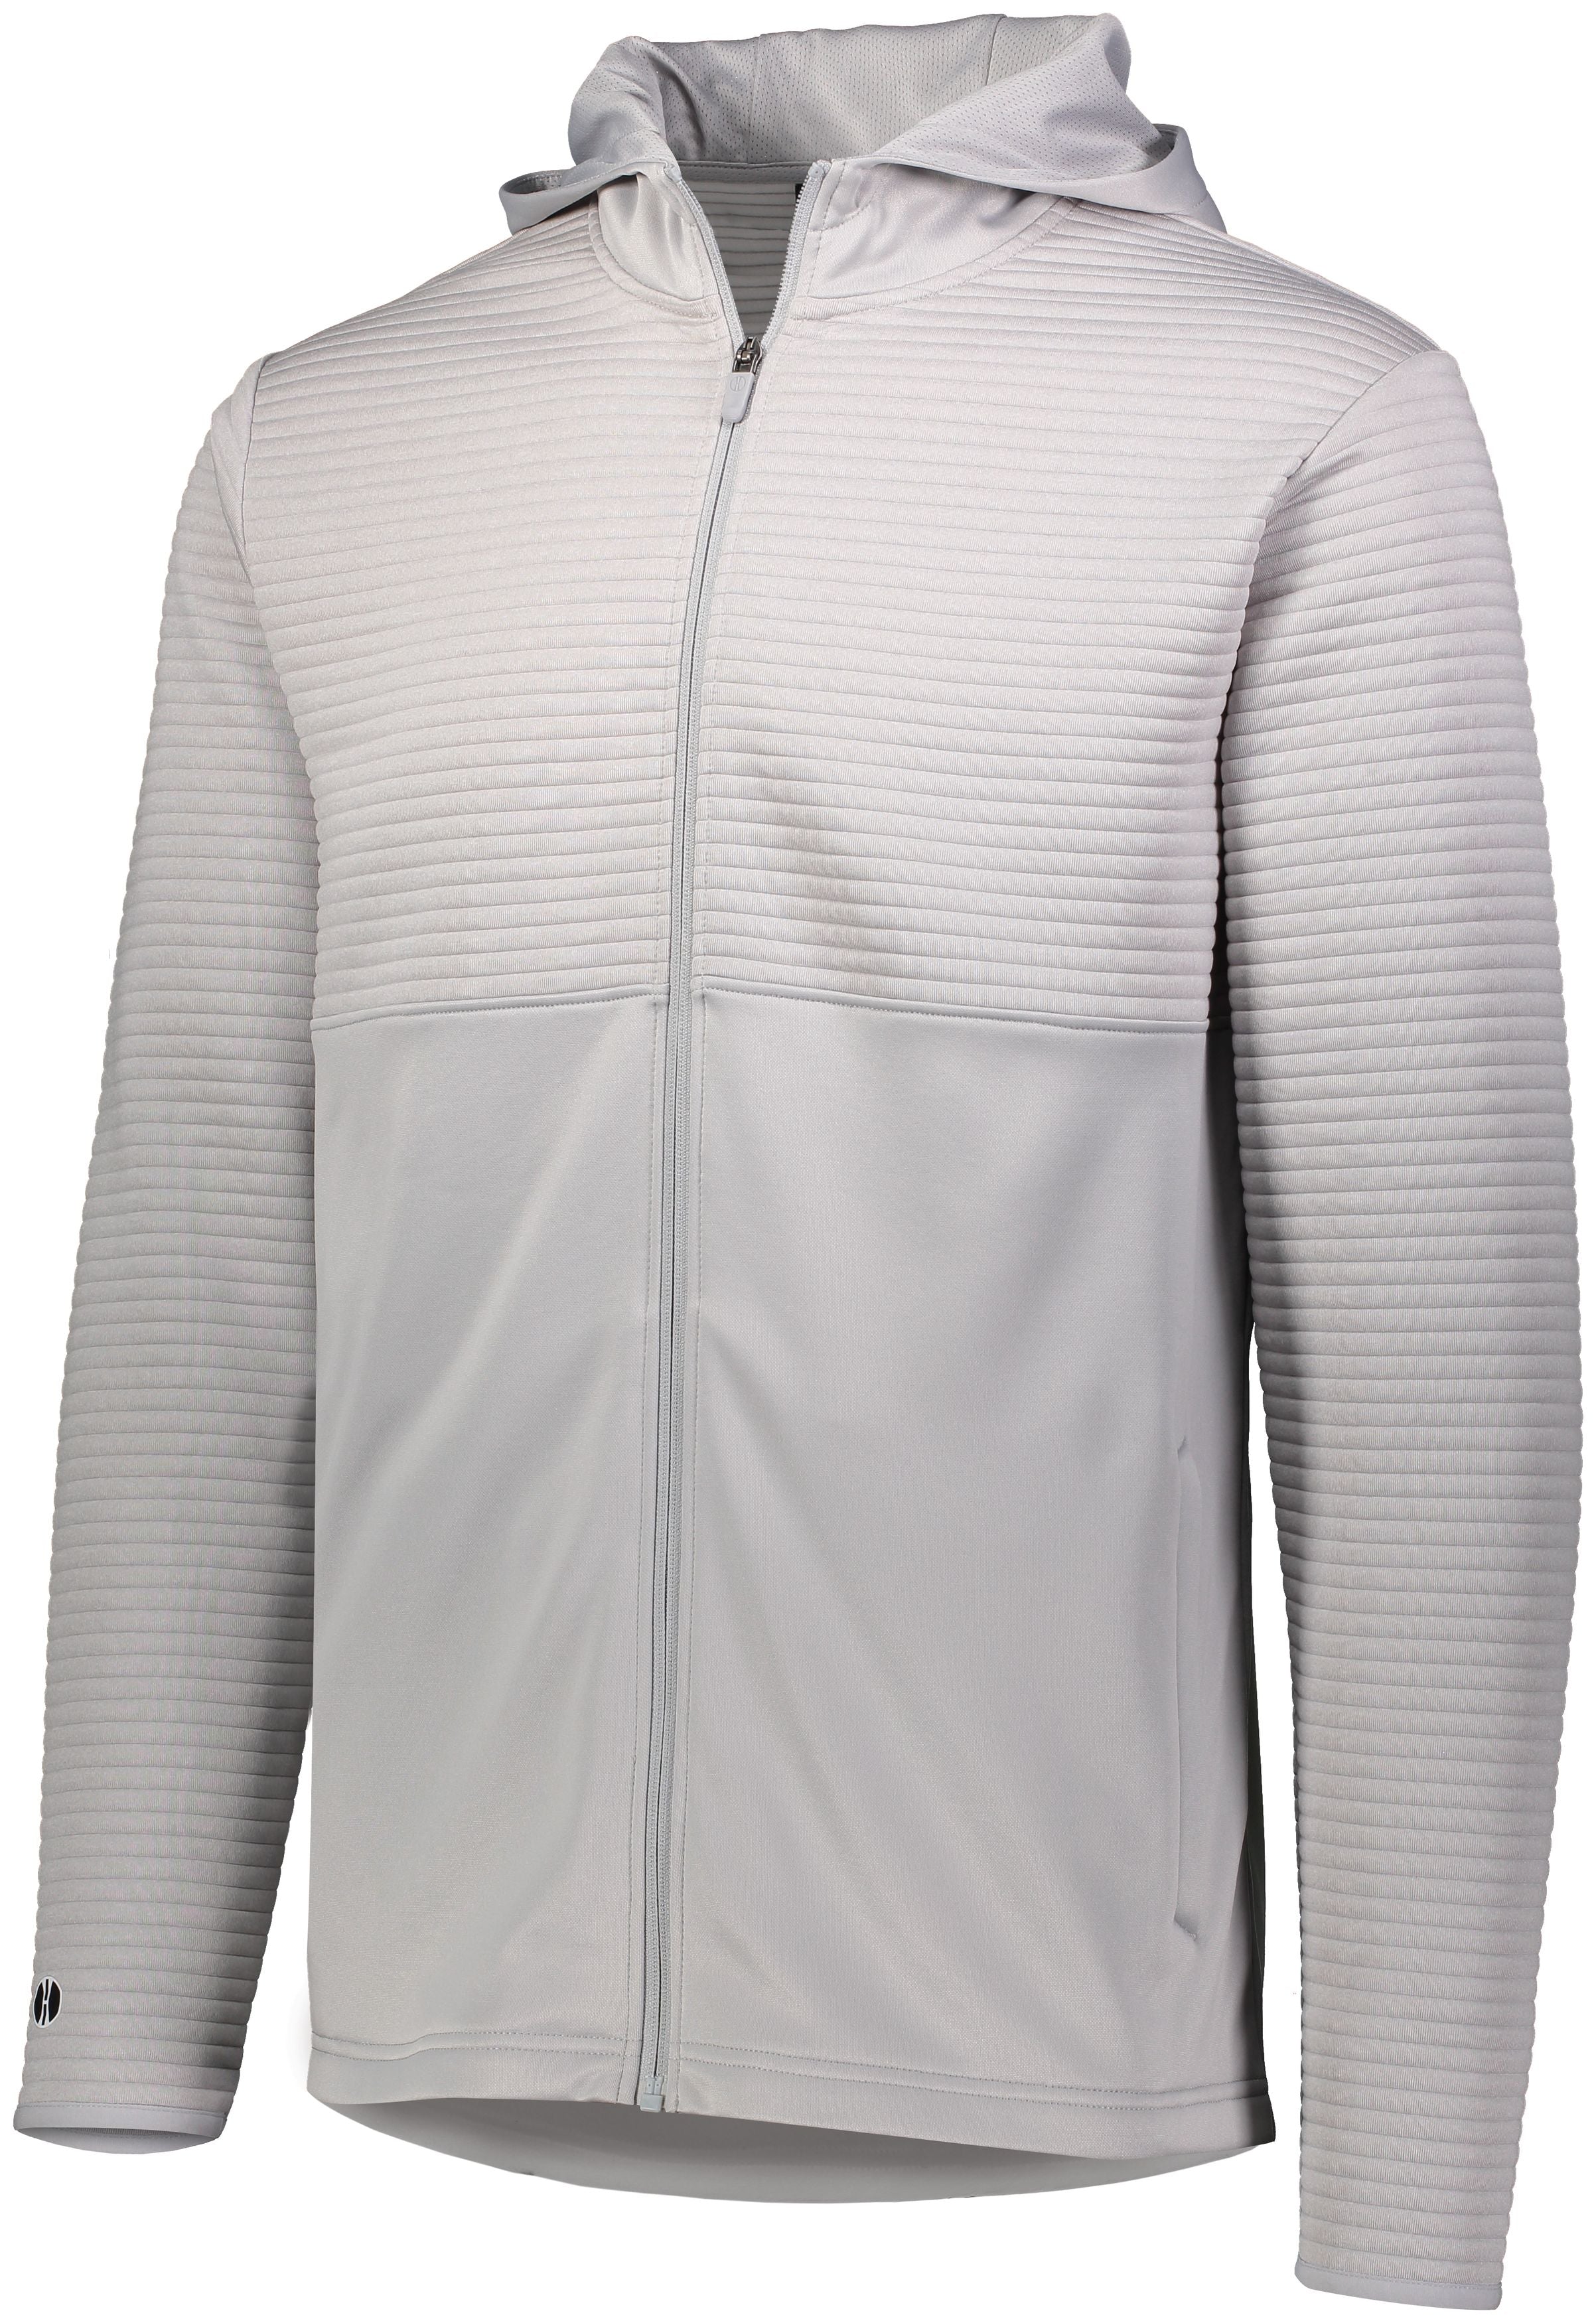 Holloway 3D Regulate Jacket in Silver Heather/Silver  -Part of the Adult, Adult-Jacket, Holloway, Outerwear, Corporate, 3D-Collection product lines at KanaleyCreations.com